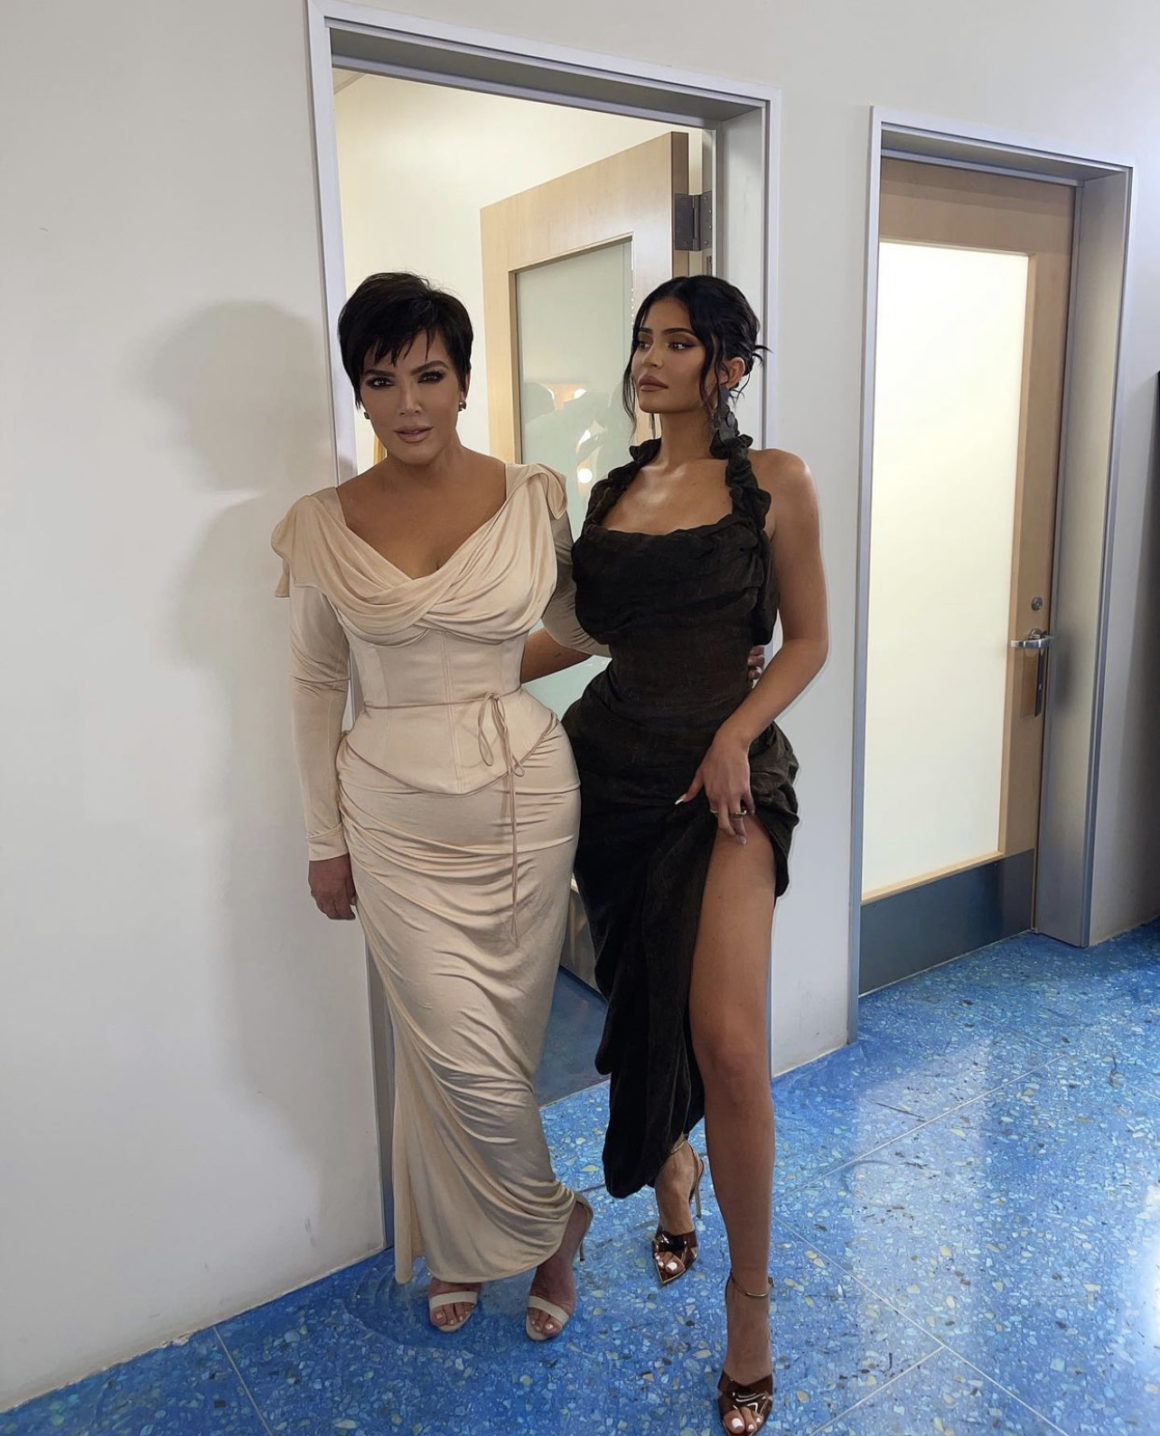 Keeping Up With the Kardashians” Reunion Fashion: Kylie and Kris Jenner in  Vivienne Westwood, Kendall Jenner in Tom Ford White Top and Cutout Metallic  Skirt, Kourtney Kardashian in Gucci By Tom Ford